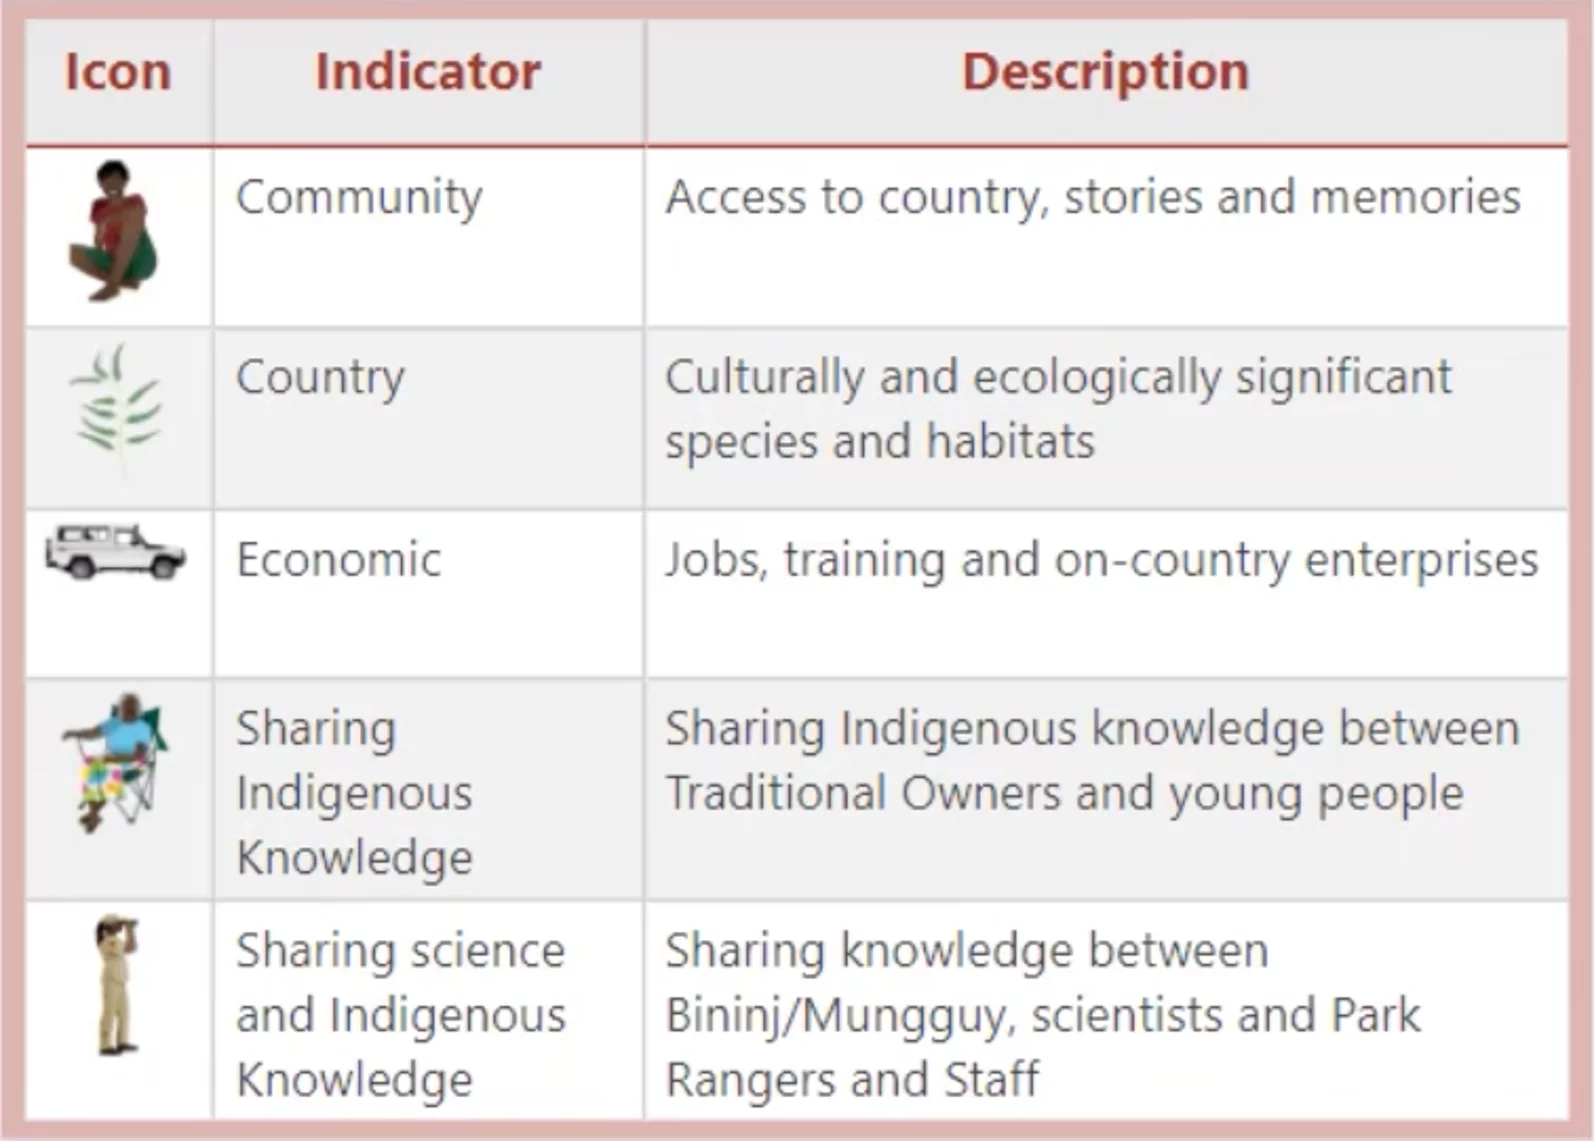 This is a legend from an app developed by the Bininj Mungguy Healthy Country Indicators project in Kakadu. The legend describes indicators for community, country, economics, sharing Indigenous knowledge and sharing science and Indigenous knowledge.